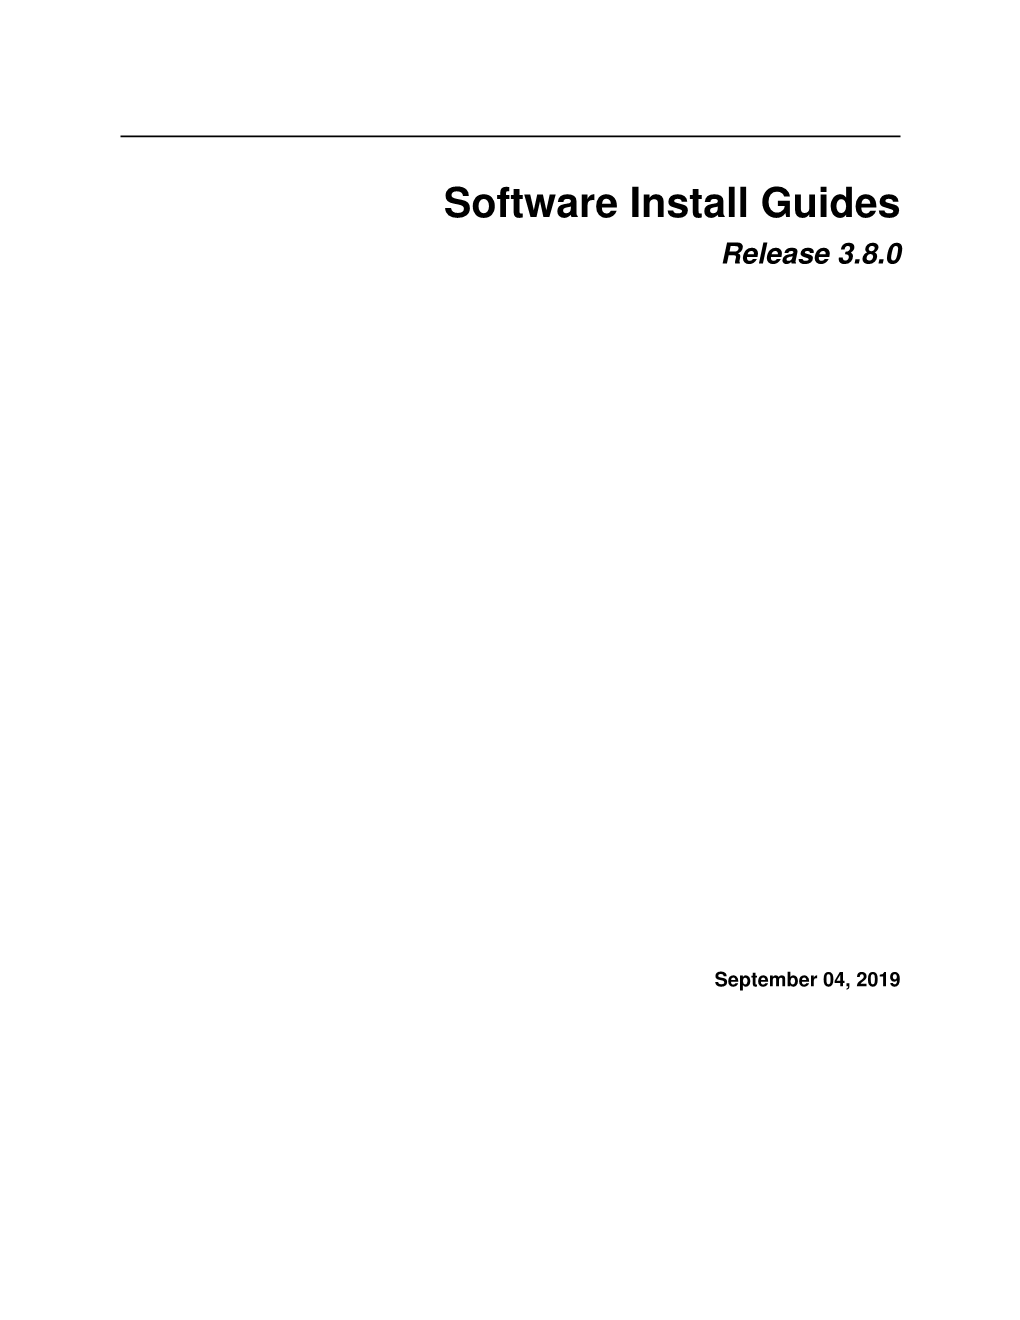 Software Install Guides Release 3.8.0